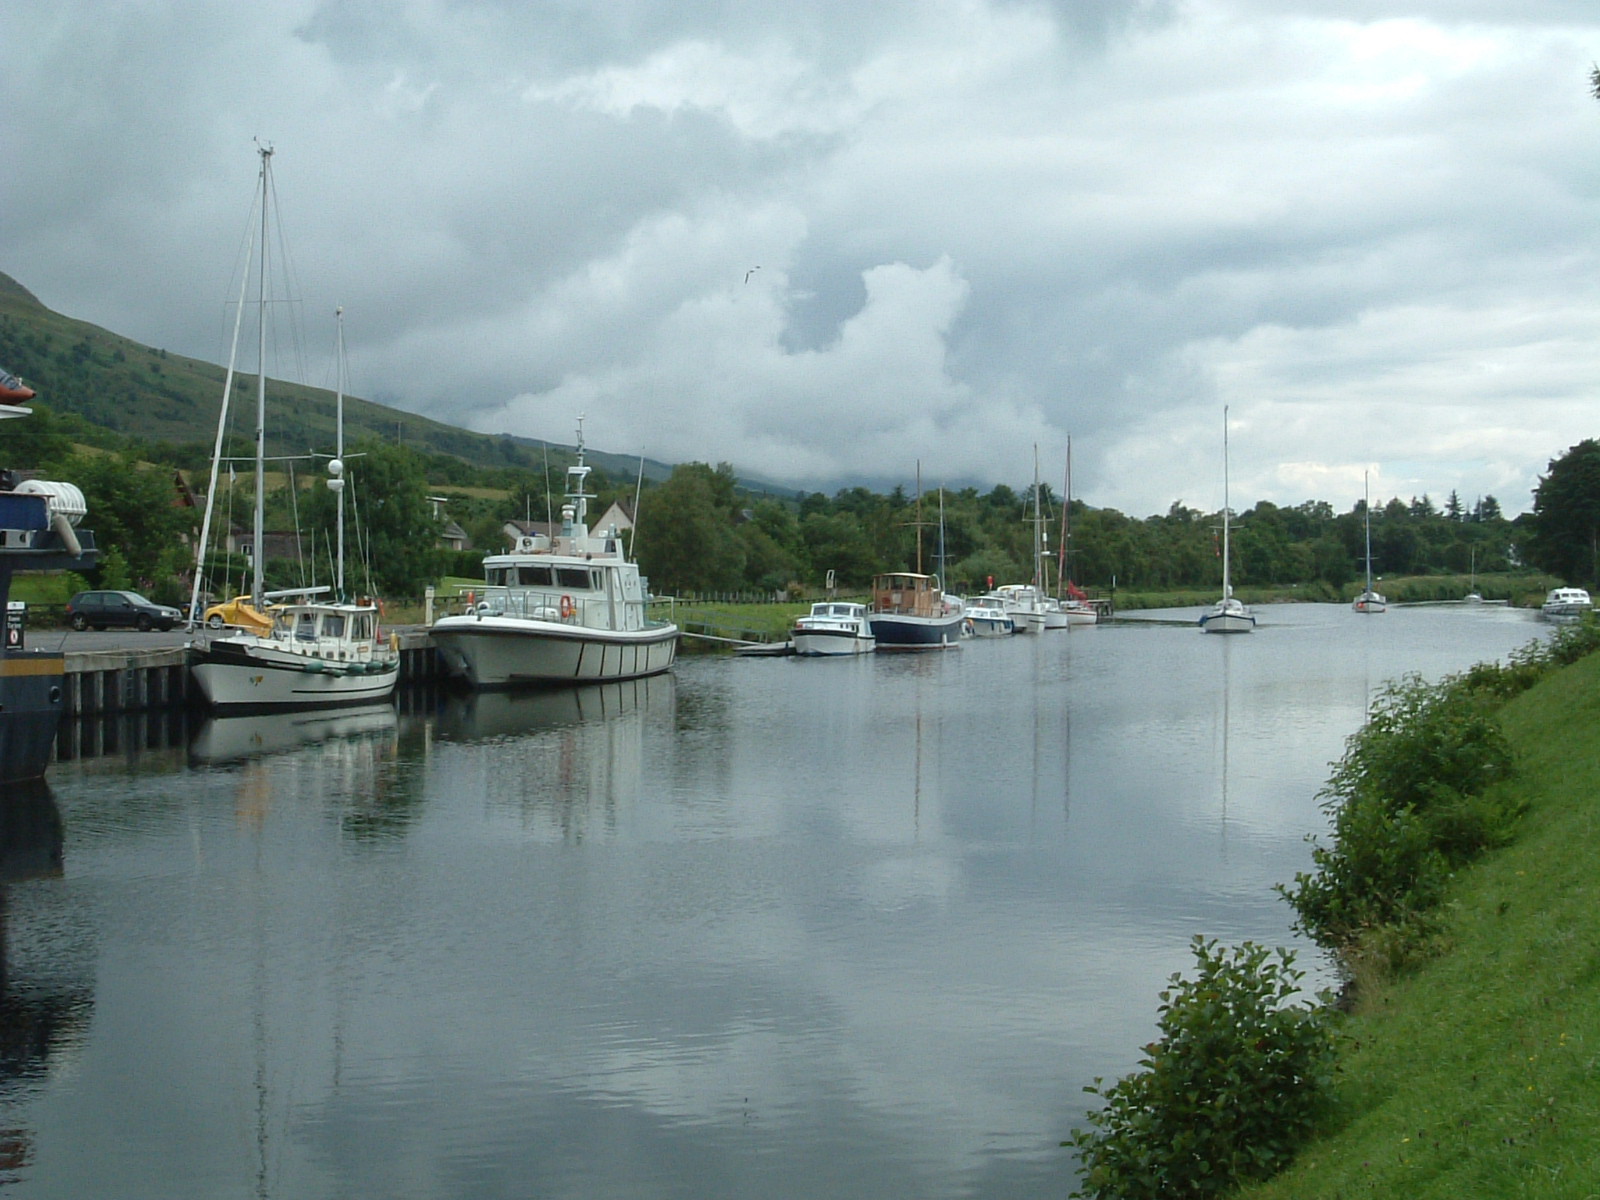 Boats on the Caledonian Canal